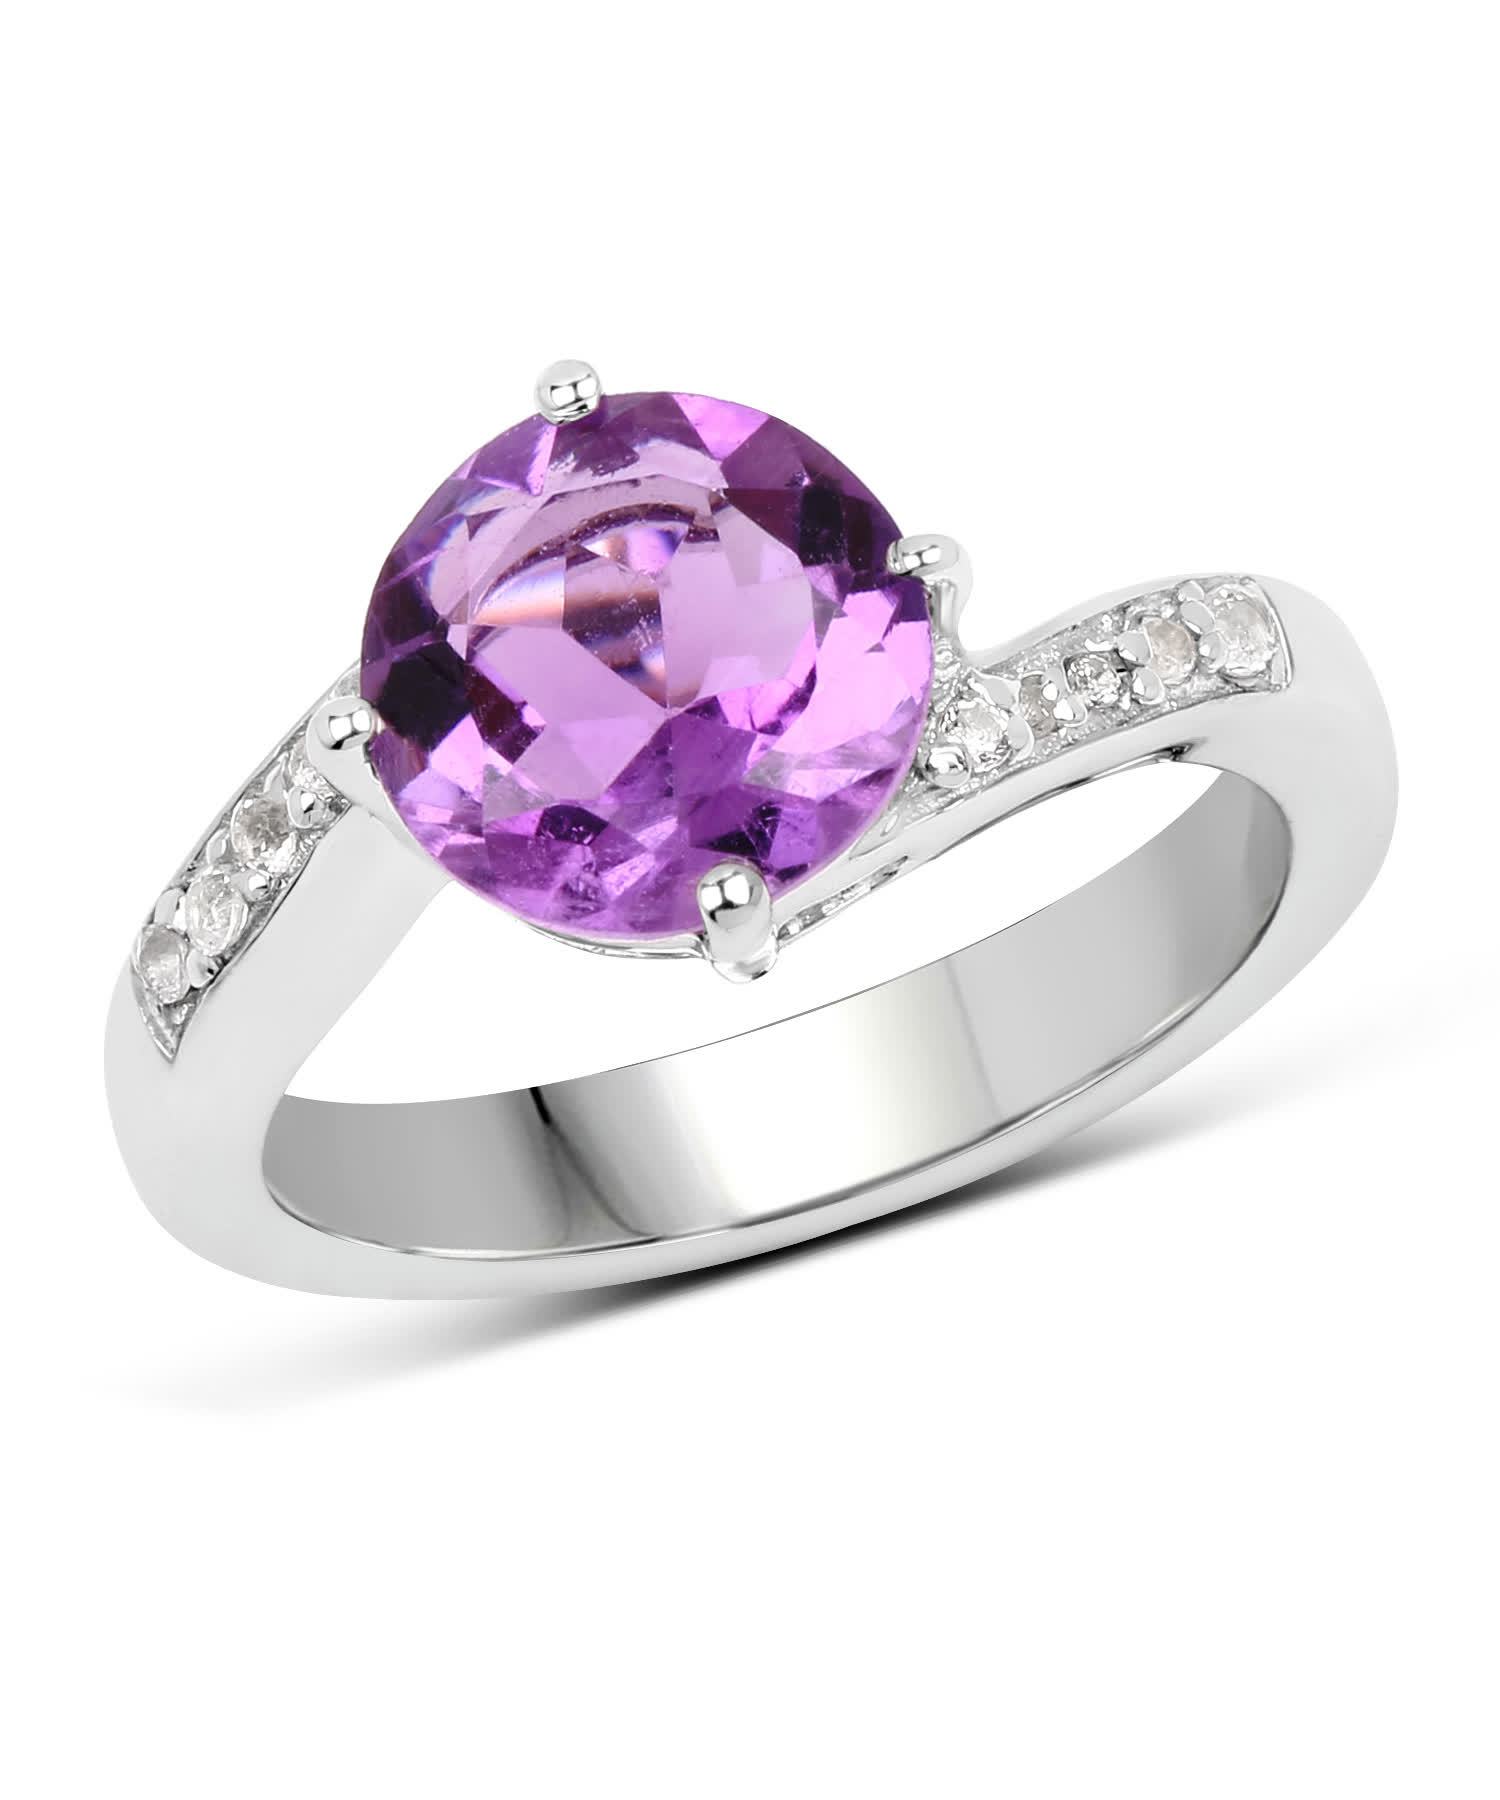 2.55ctw Natural Amethyst and Topaz Rhodium Plated 925 Sterling Silver Ring View 1